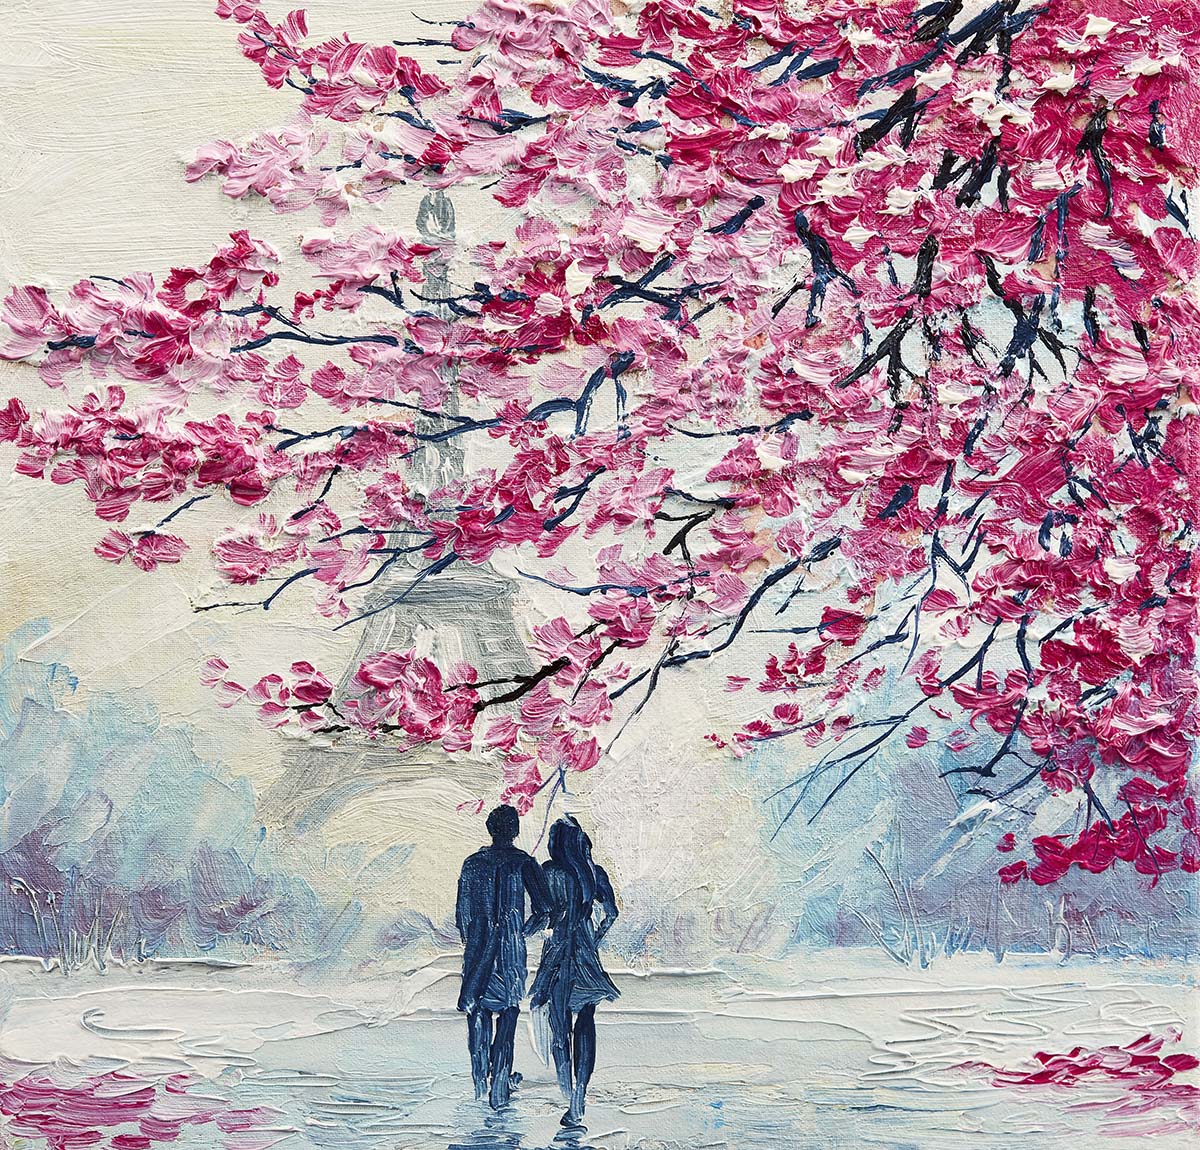 A painting of a couple walking under a tree with pink flowers